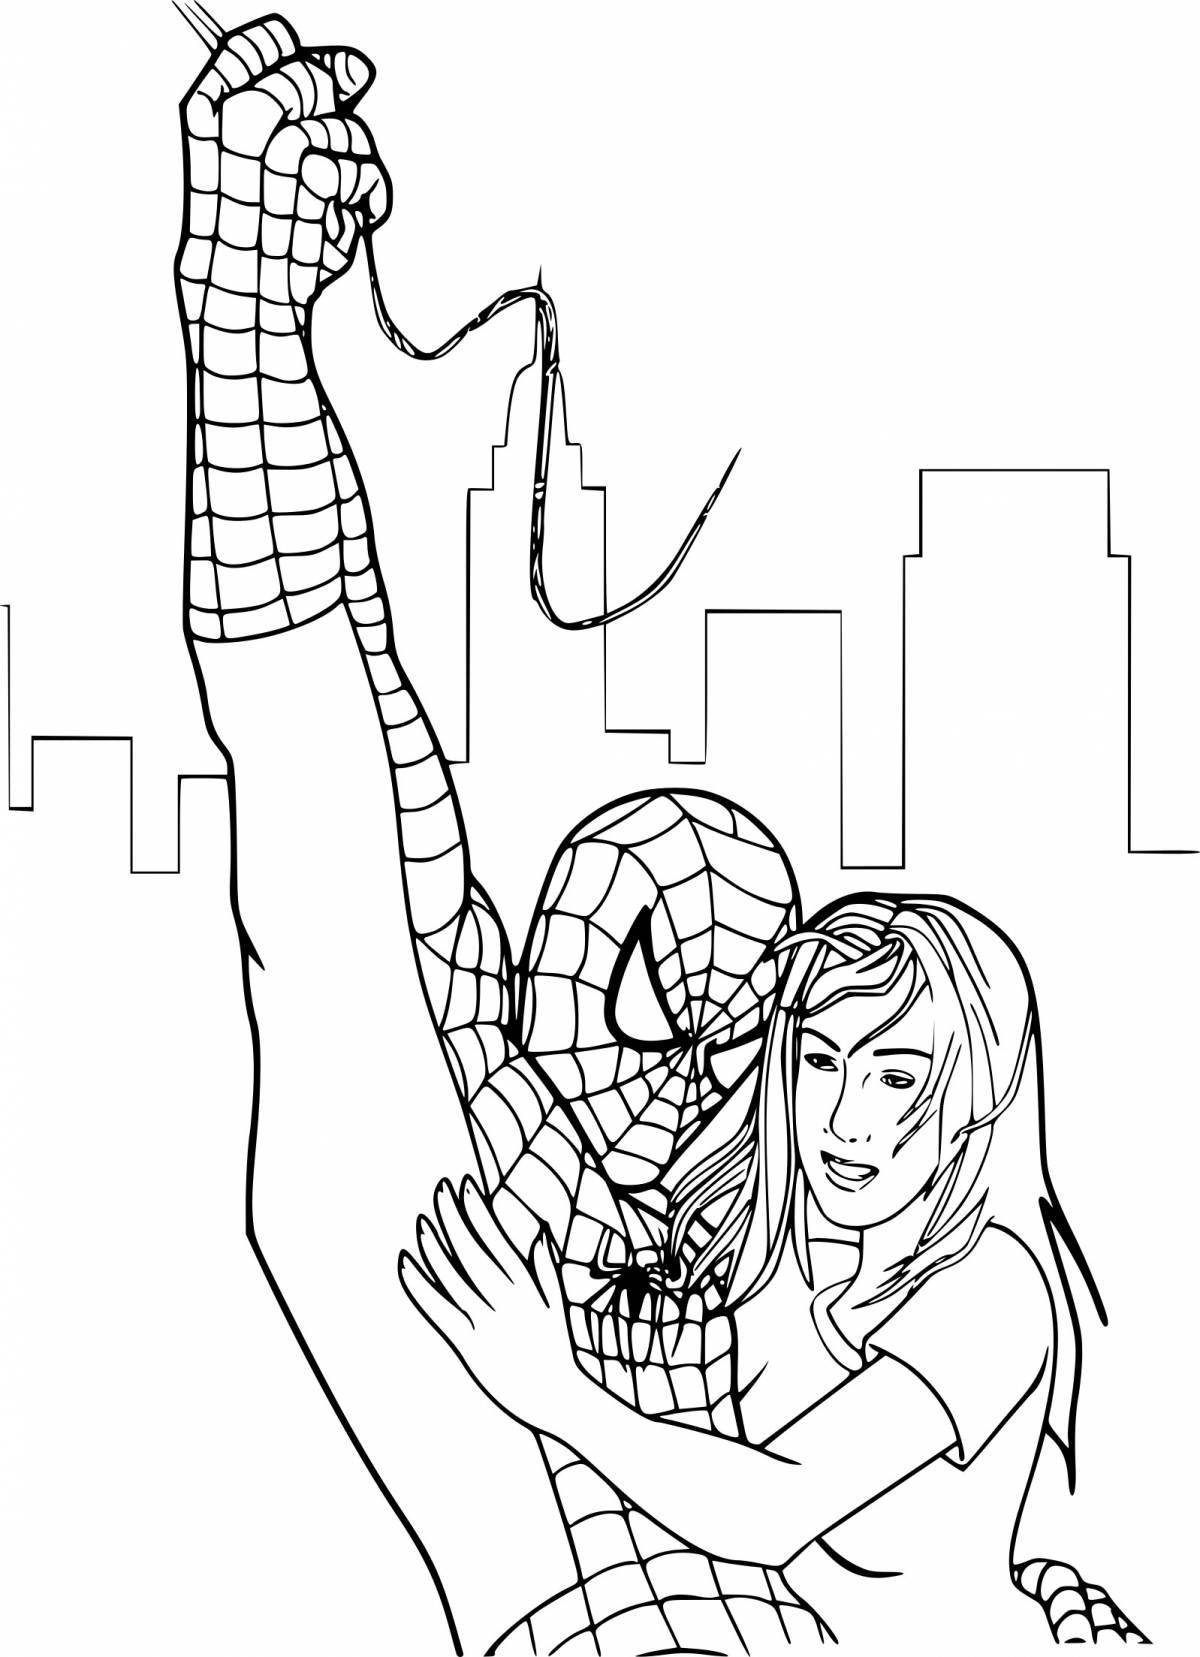 Sweet spiderman coloring book for girls